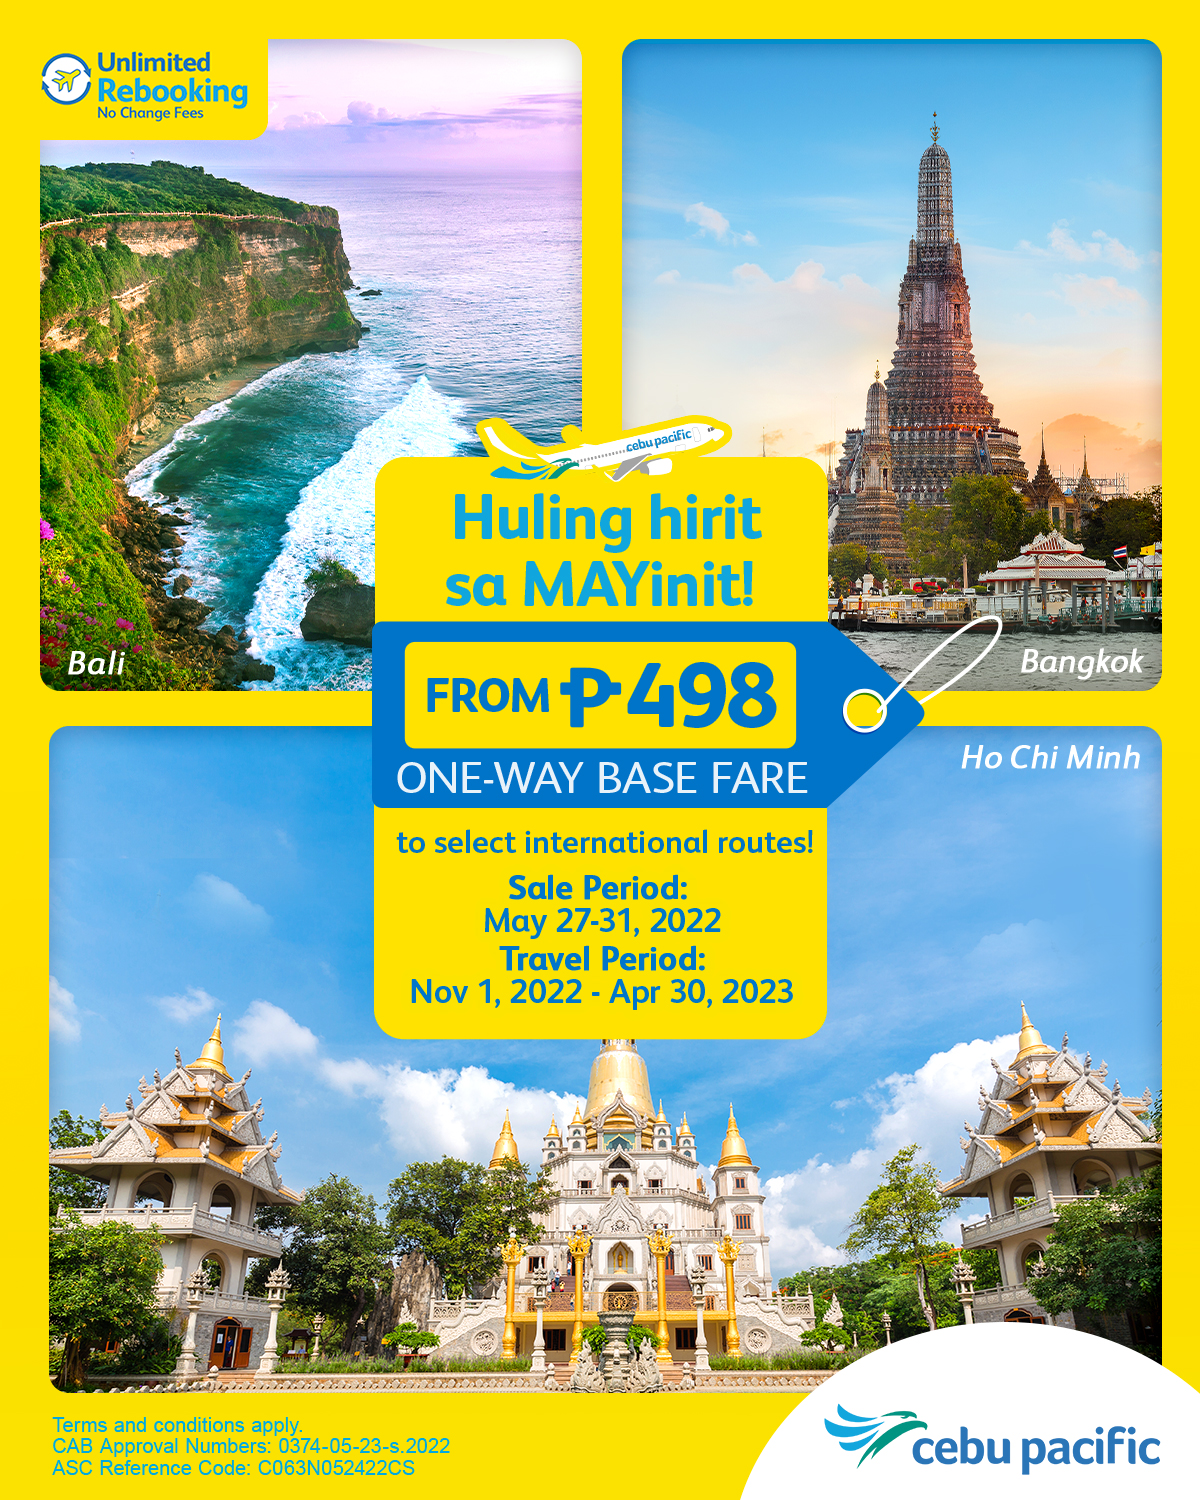 Cebu Pacific offers international flights for just P498 until May 31